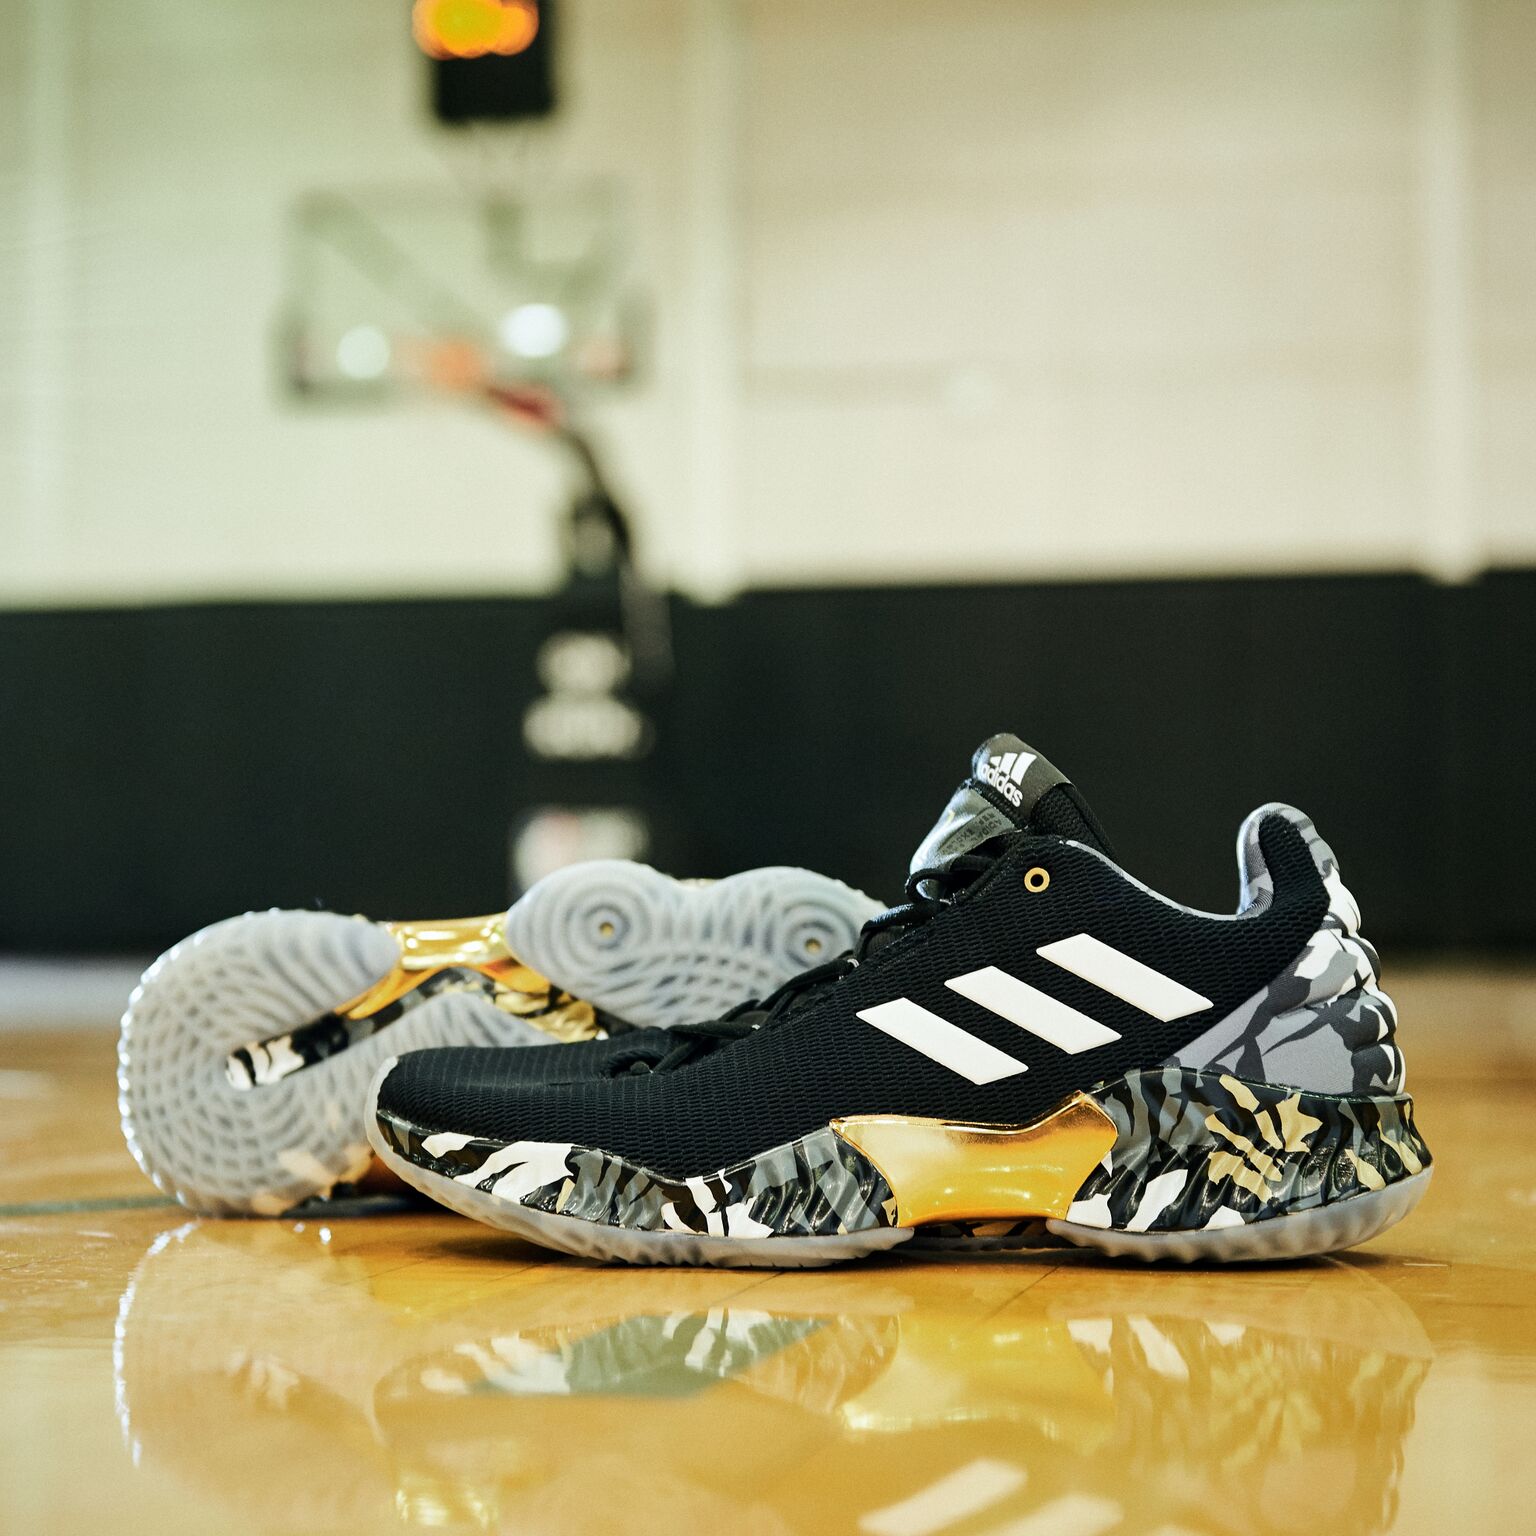 kyle lowry adidas shoes